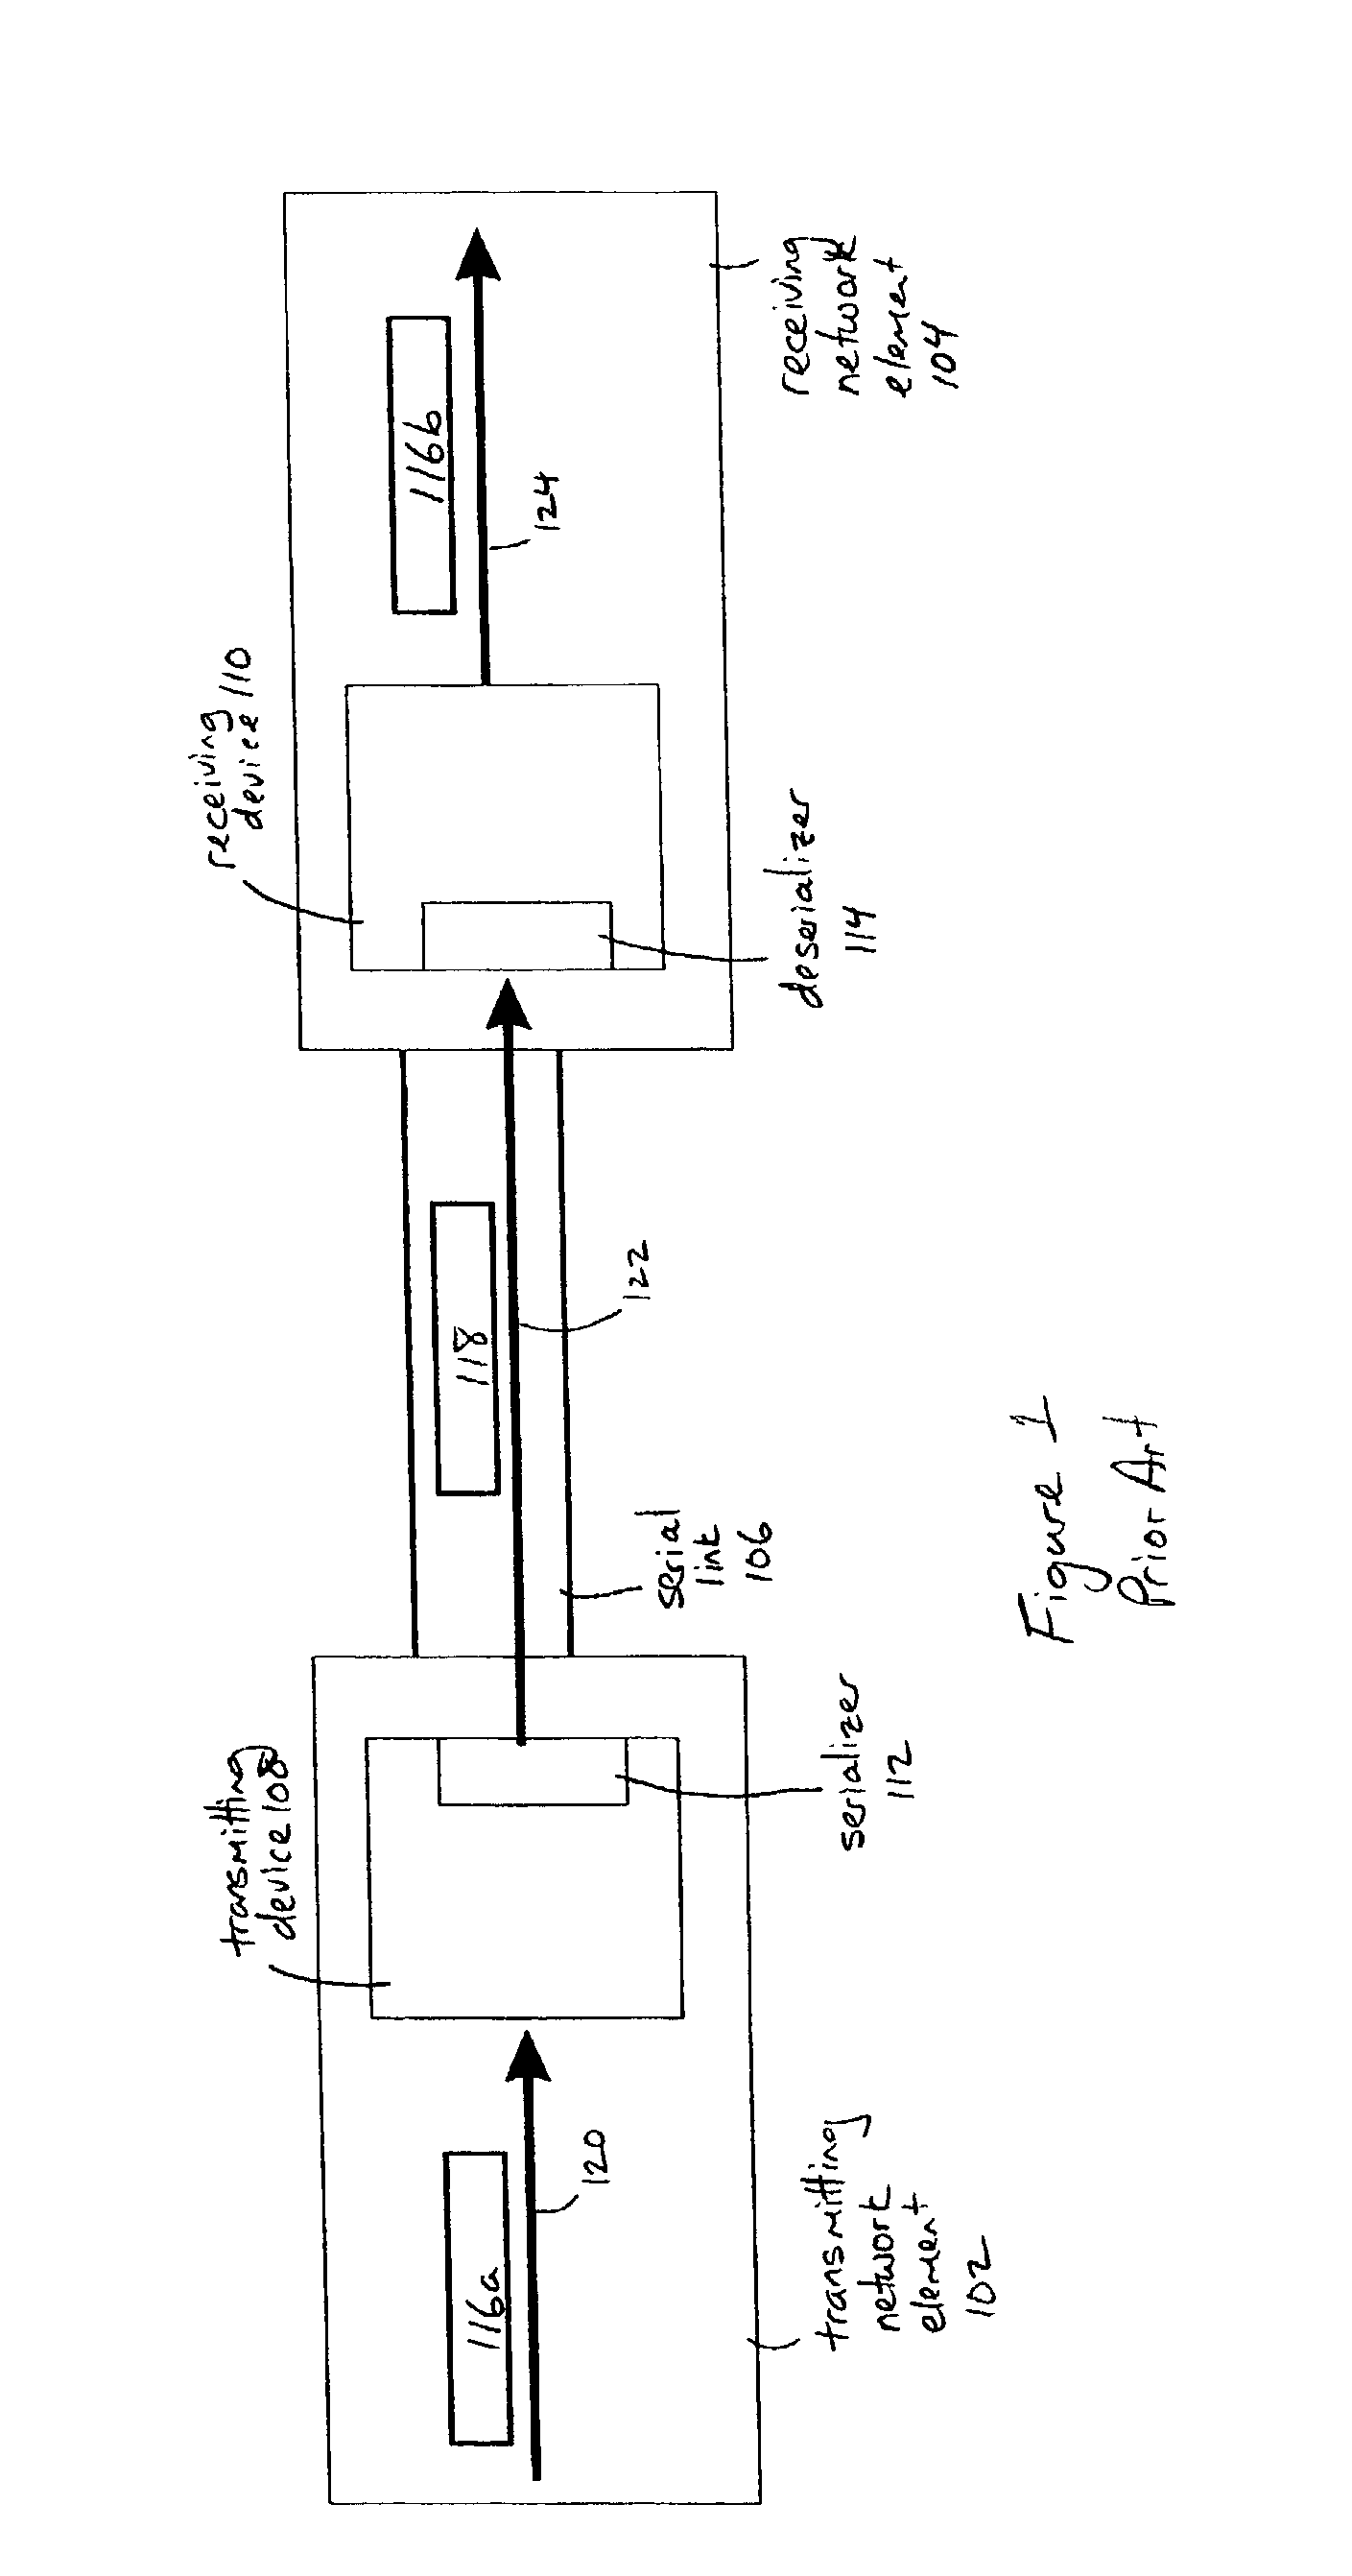 System and method for detection of delineation of data units for a communication element